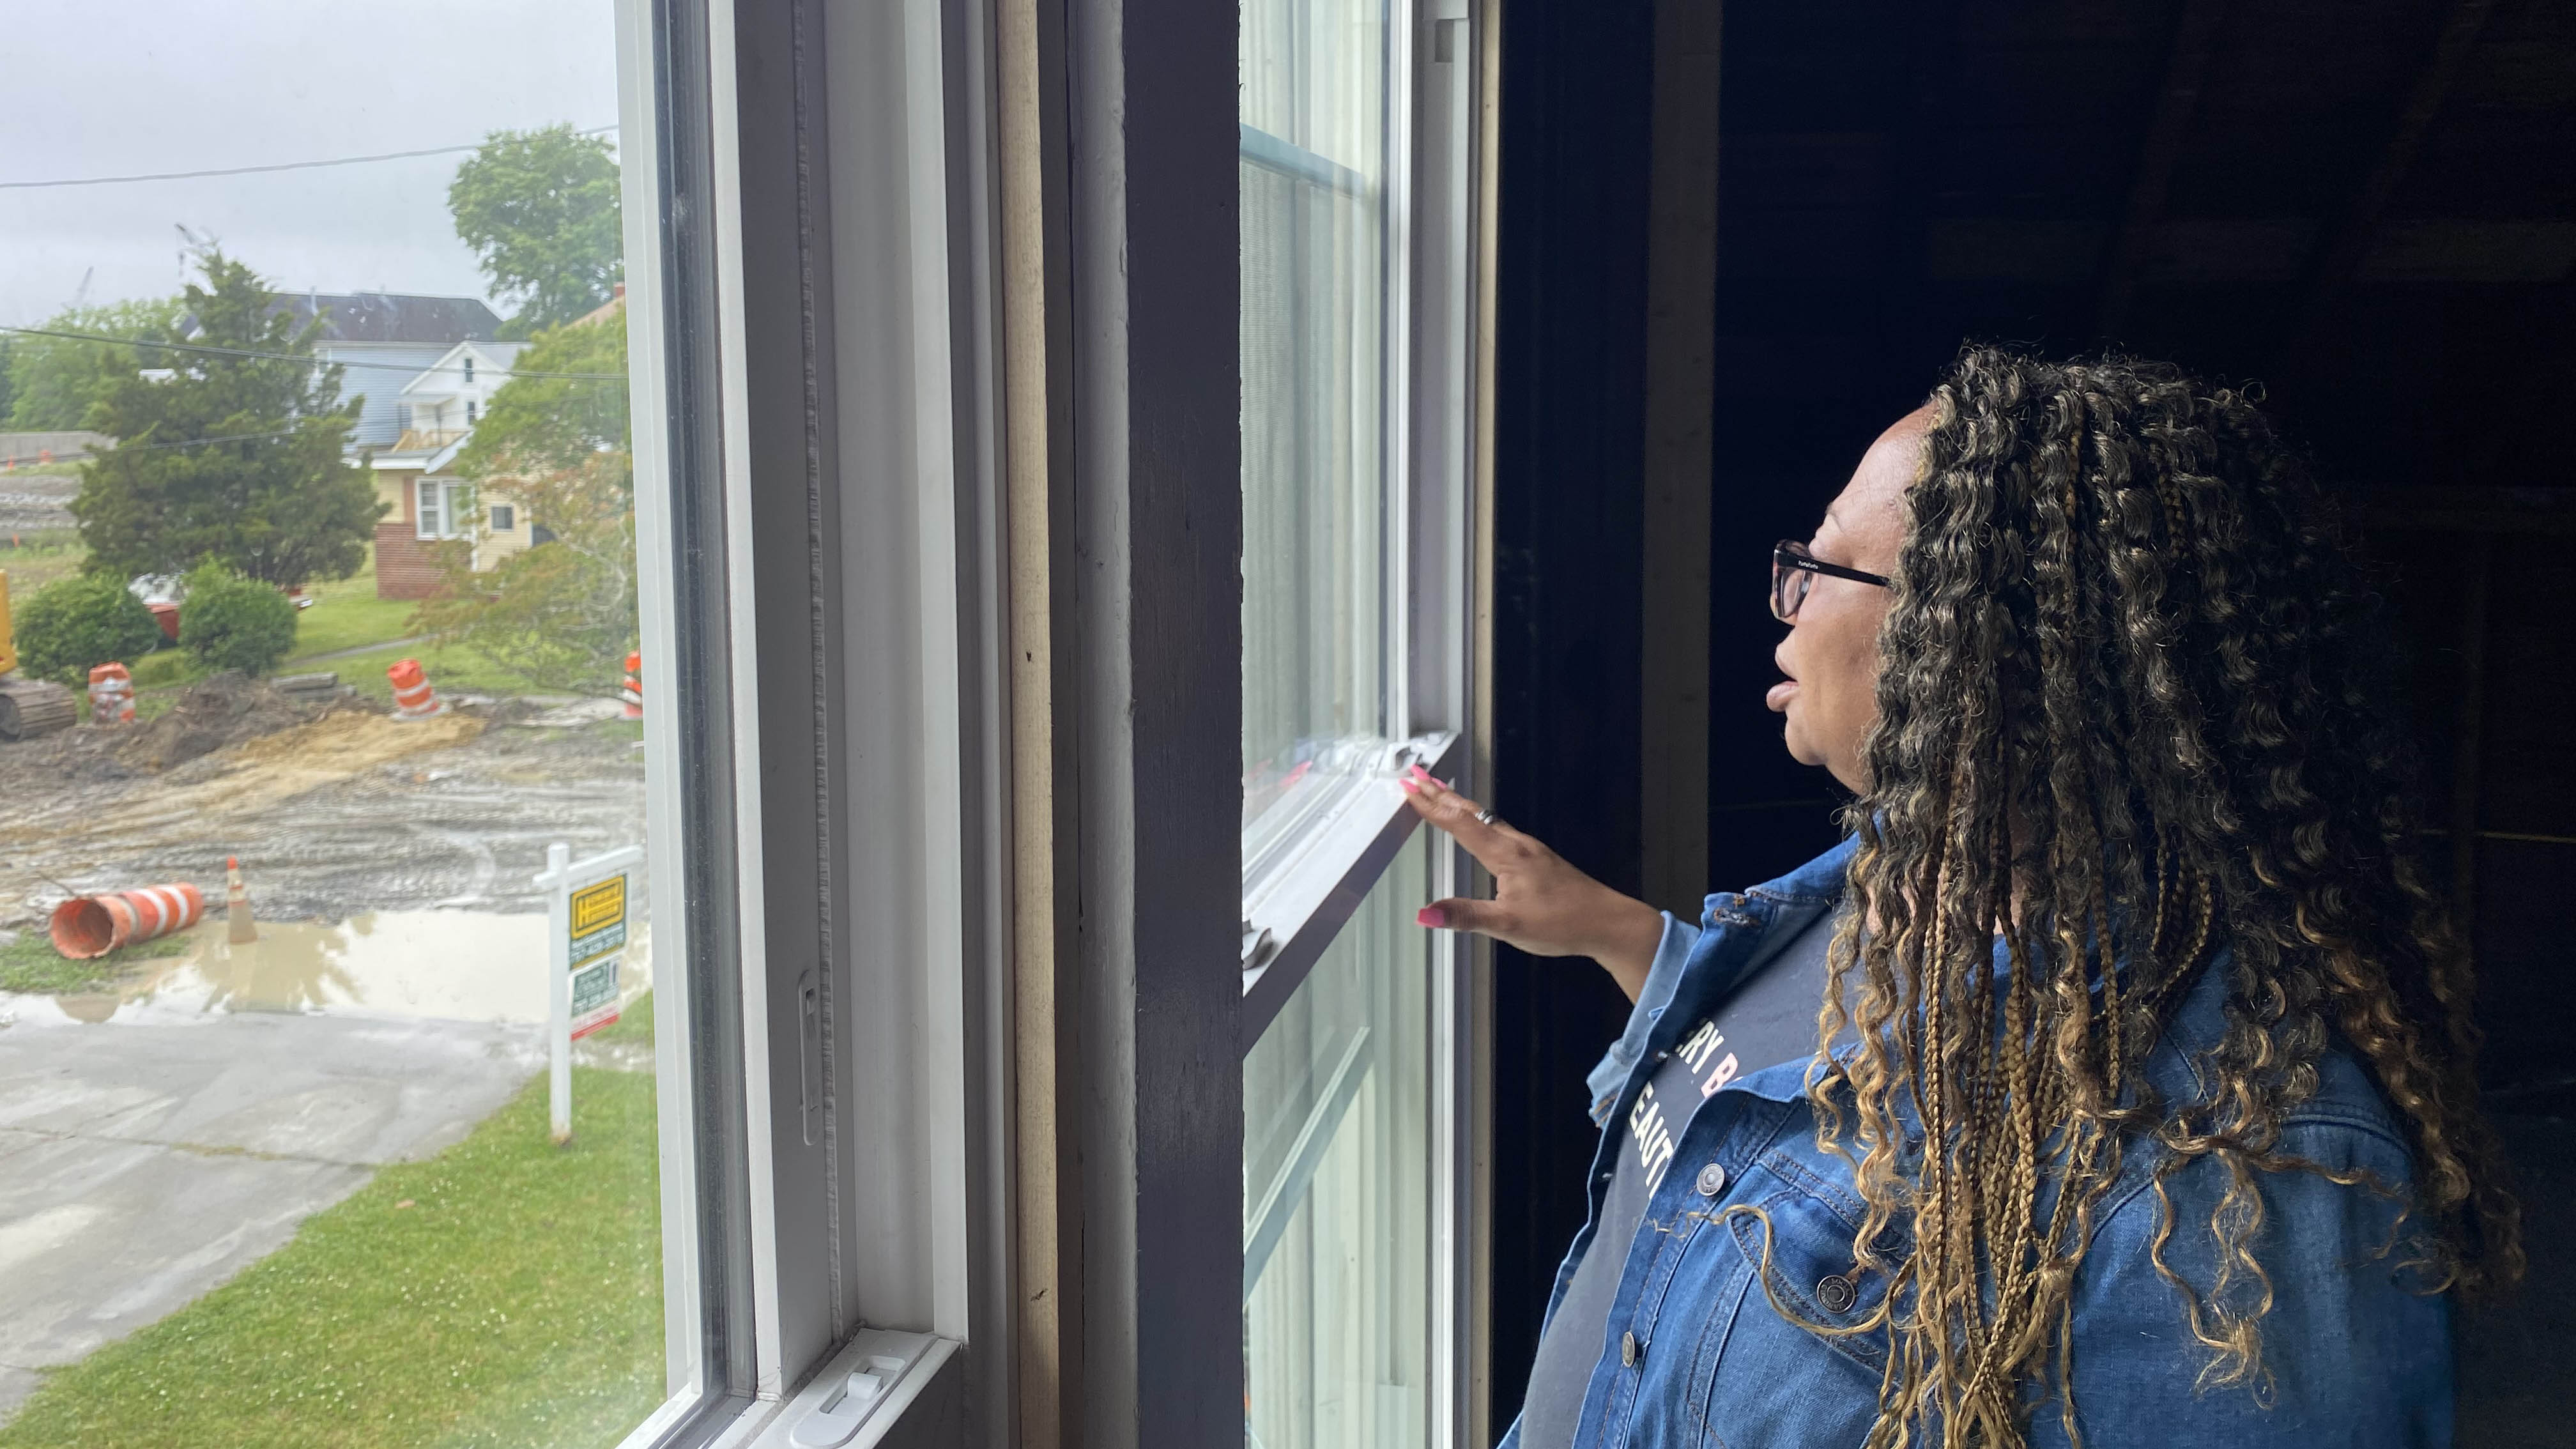 Photo by Katherine Hafner. Karen Speights looks out the window from her Chesterfield Heights home, which is undergoing renovations to test flood resilience strategies.